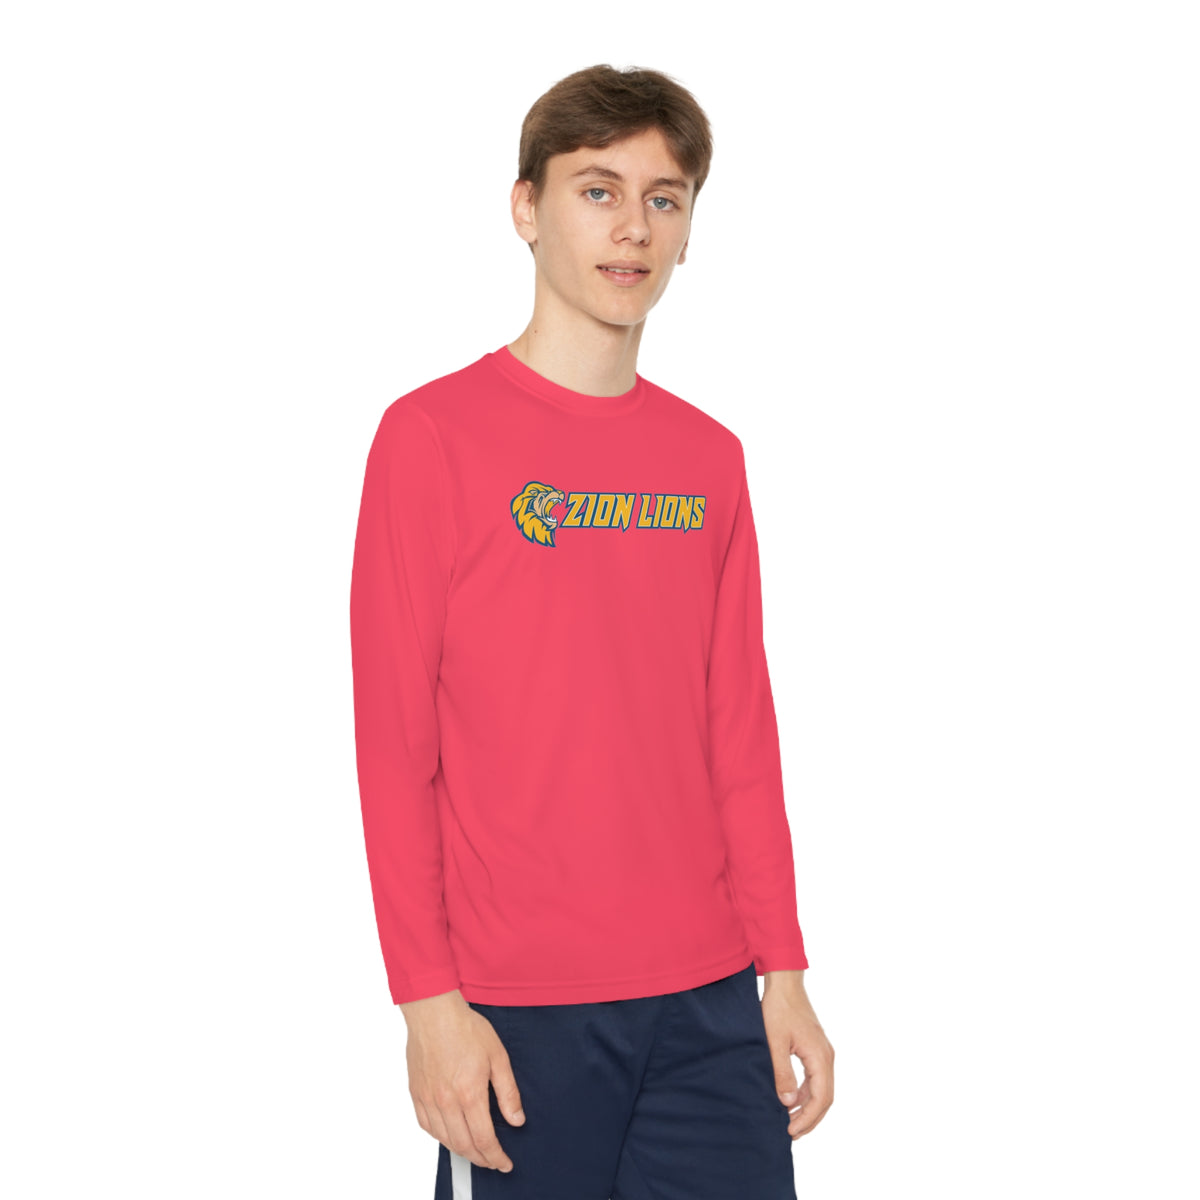 Zion with Mascots Long Logo Long Sleeve Competitor Tee